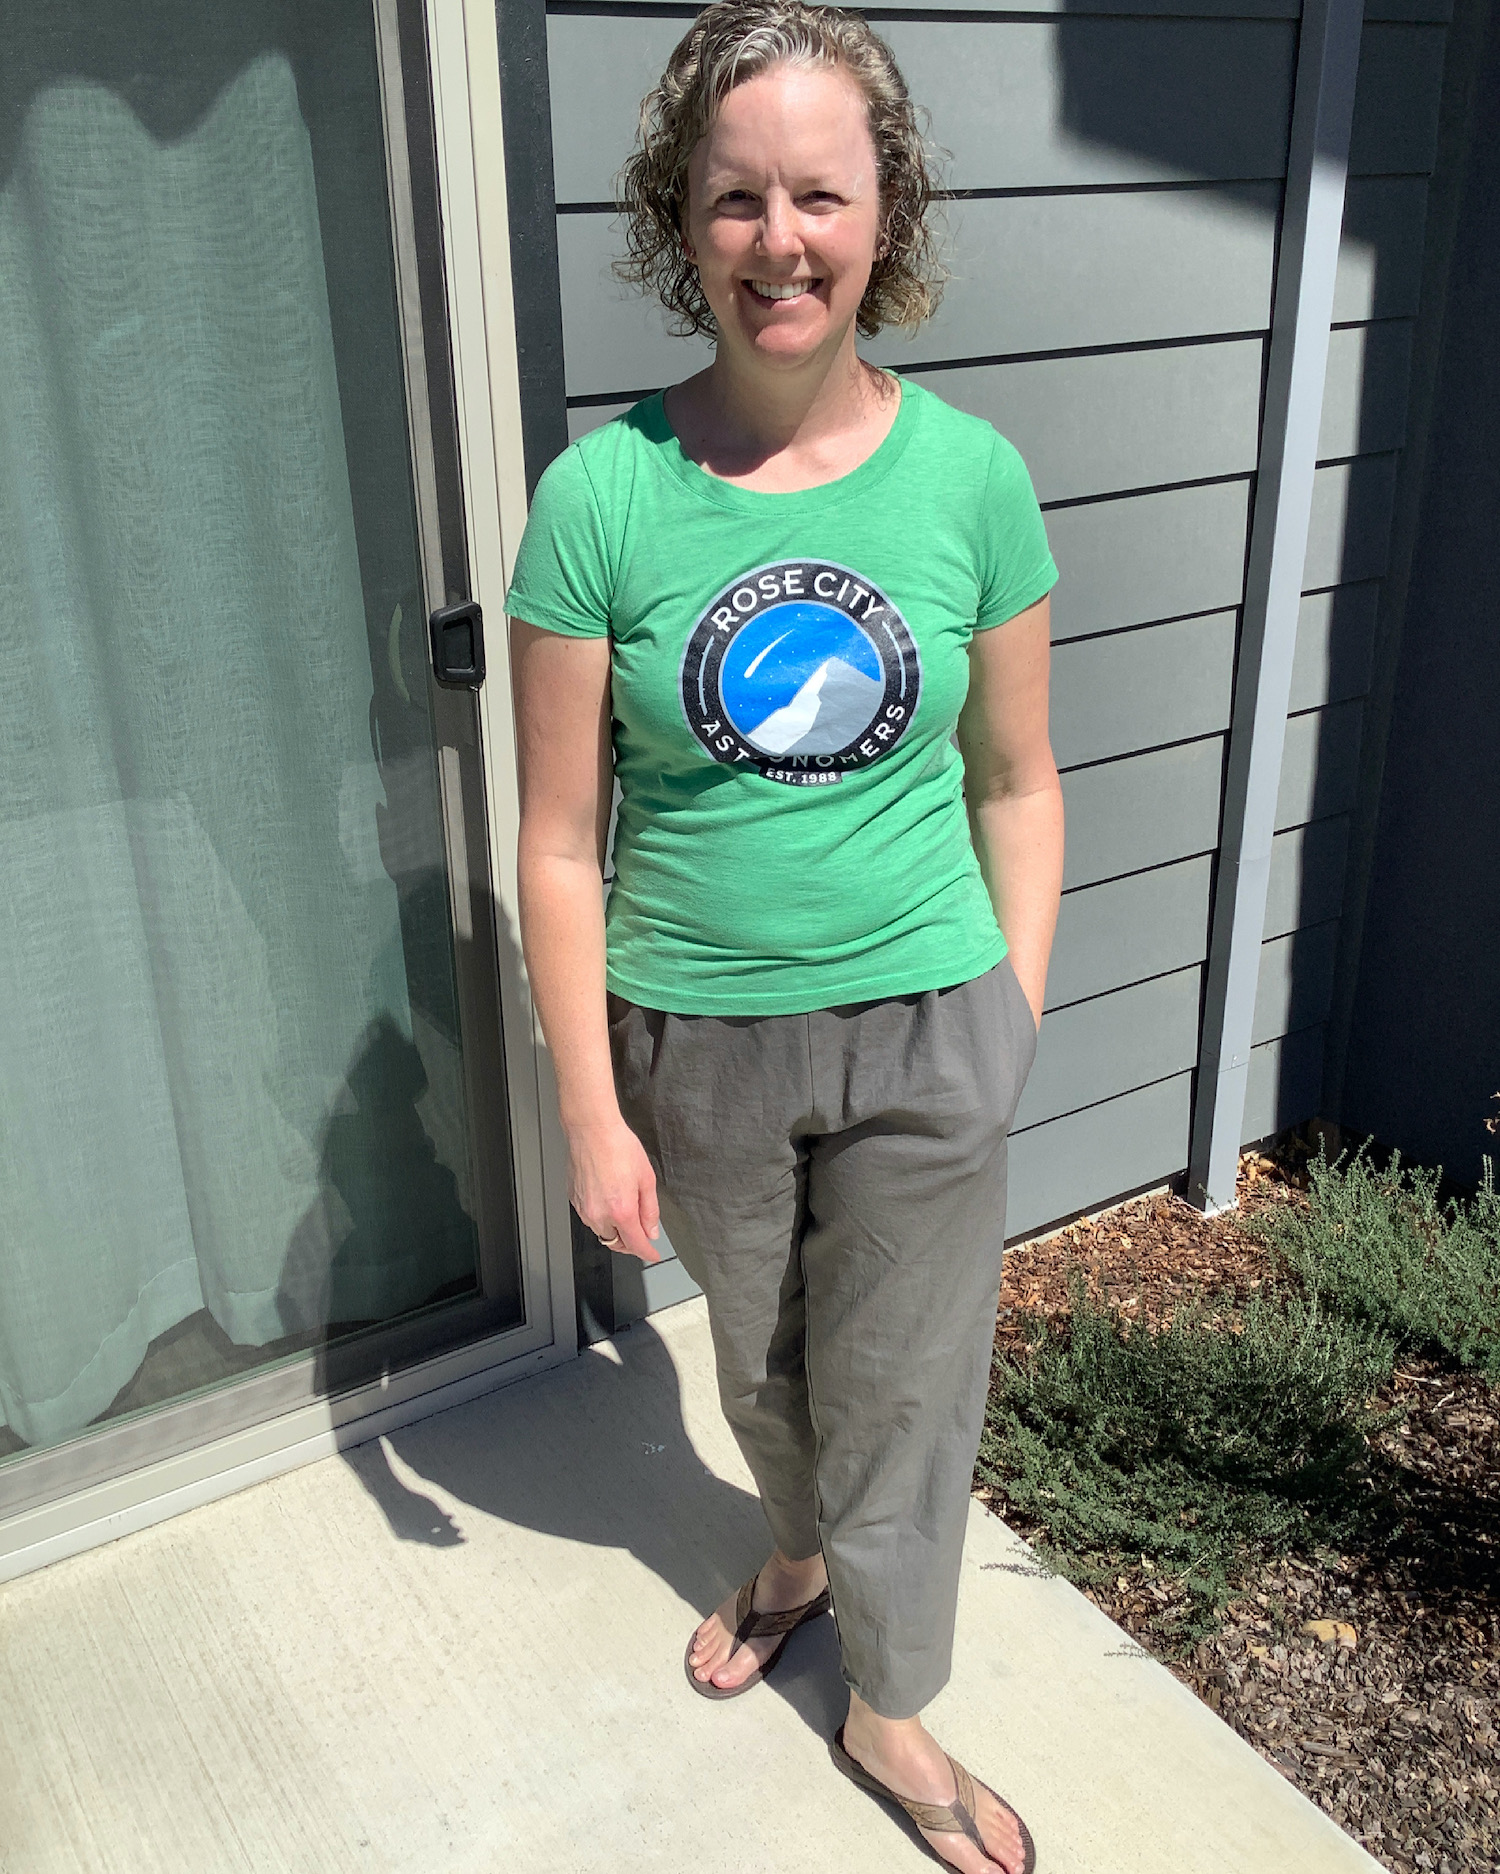 me standing in bright sunshine with a Rose City Astronomers t-shirt on and a pair of linen cropped pants, my eyes are squinting and I'm standing in front of a sliding glass door and the side of the house, next to a still hibernating plant with my left hand in my pocket.